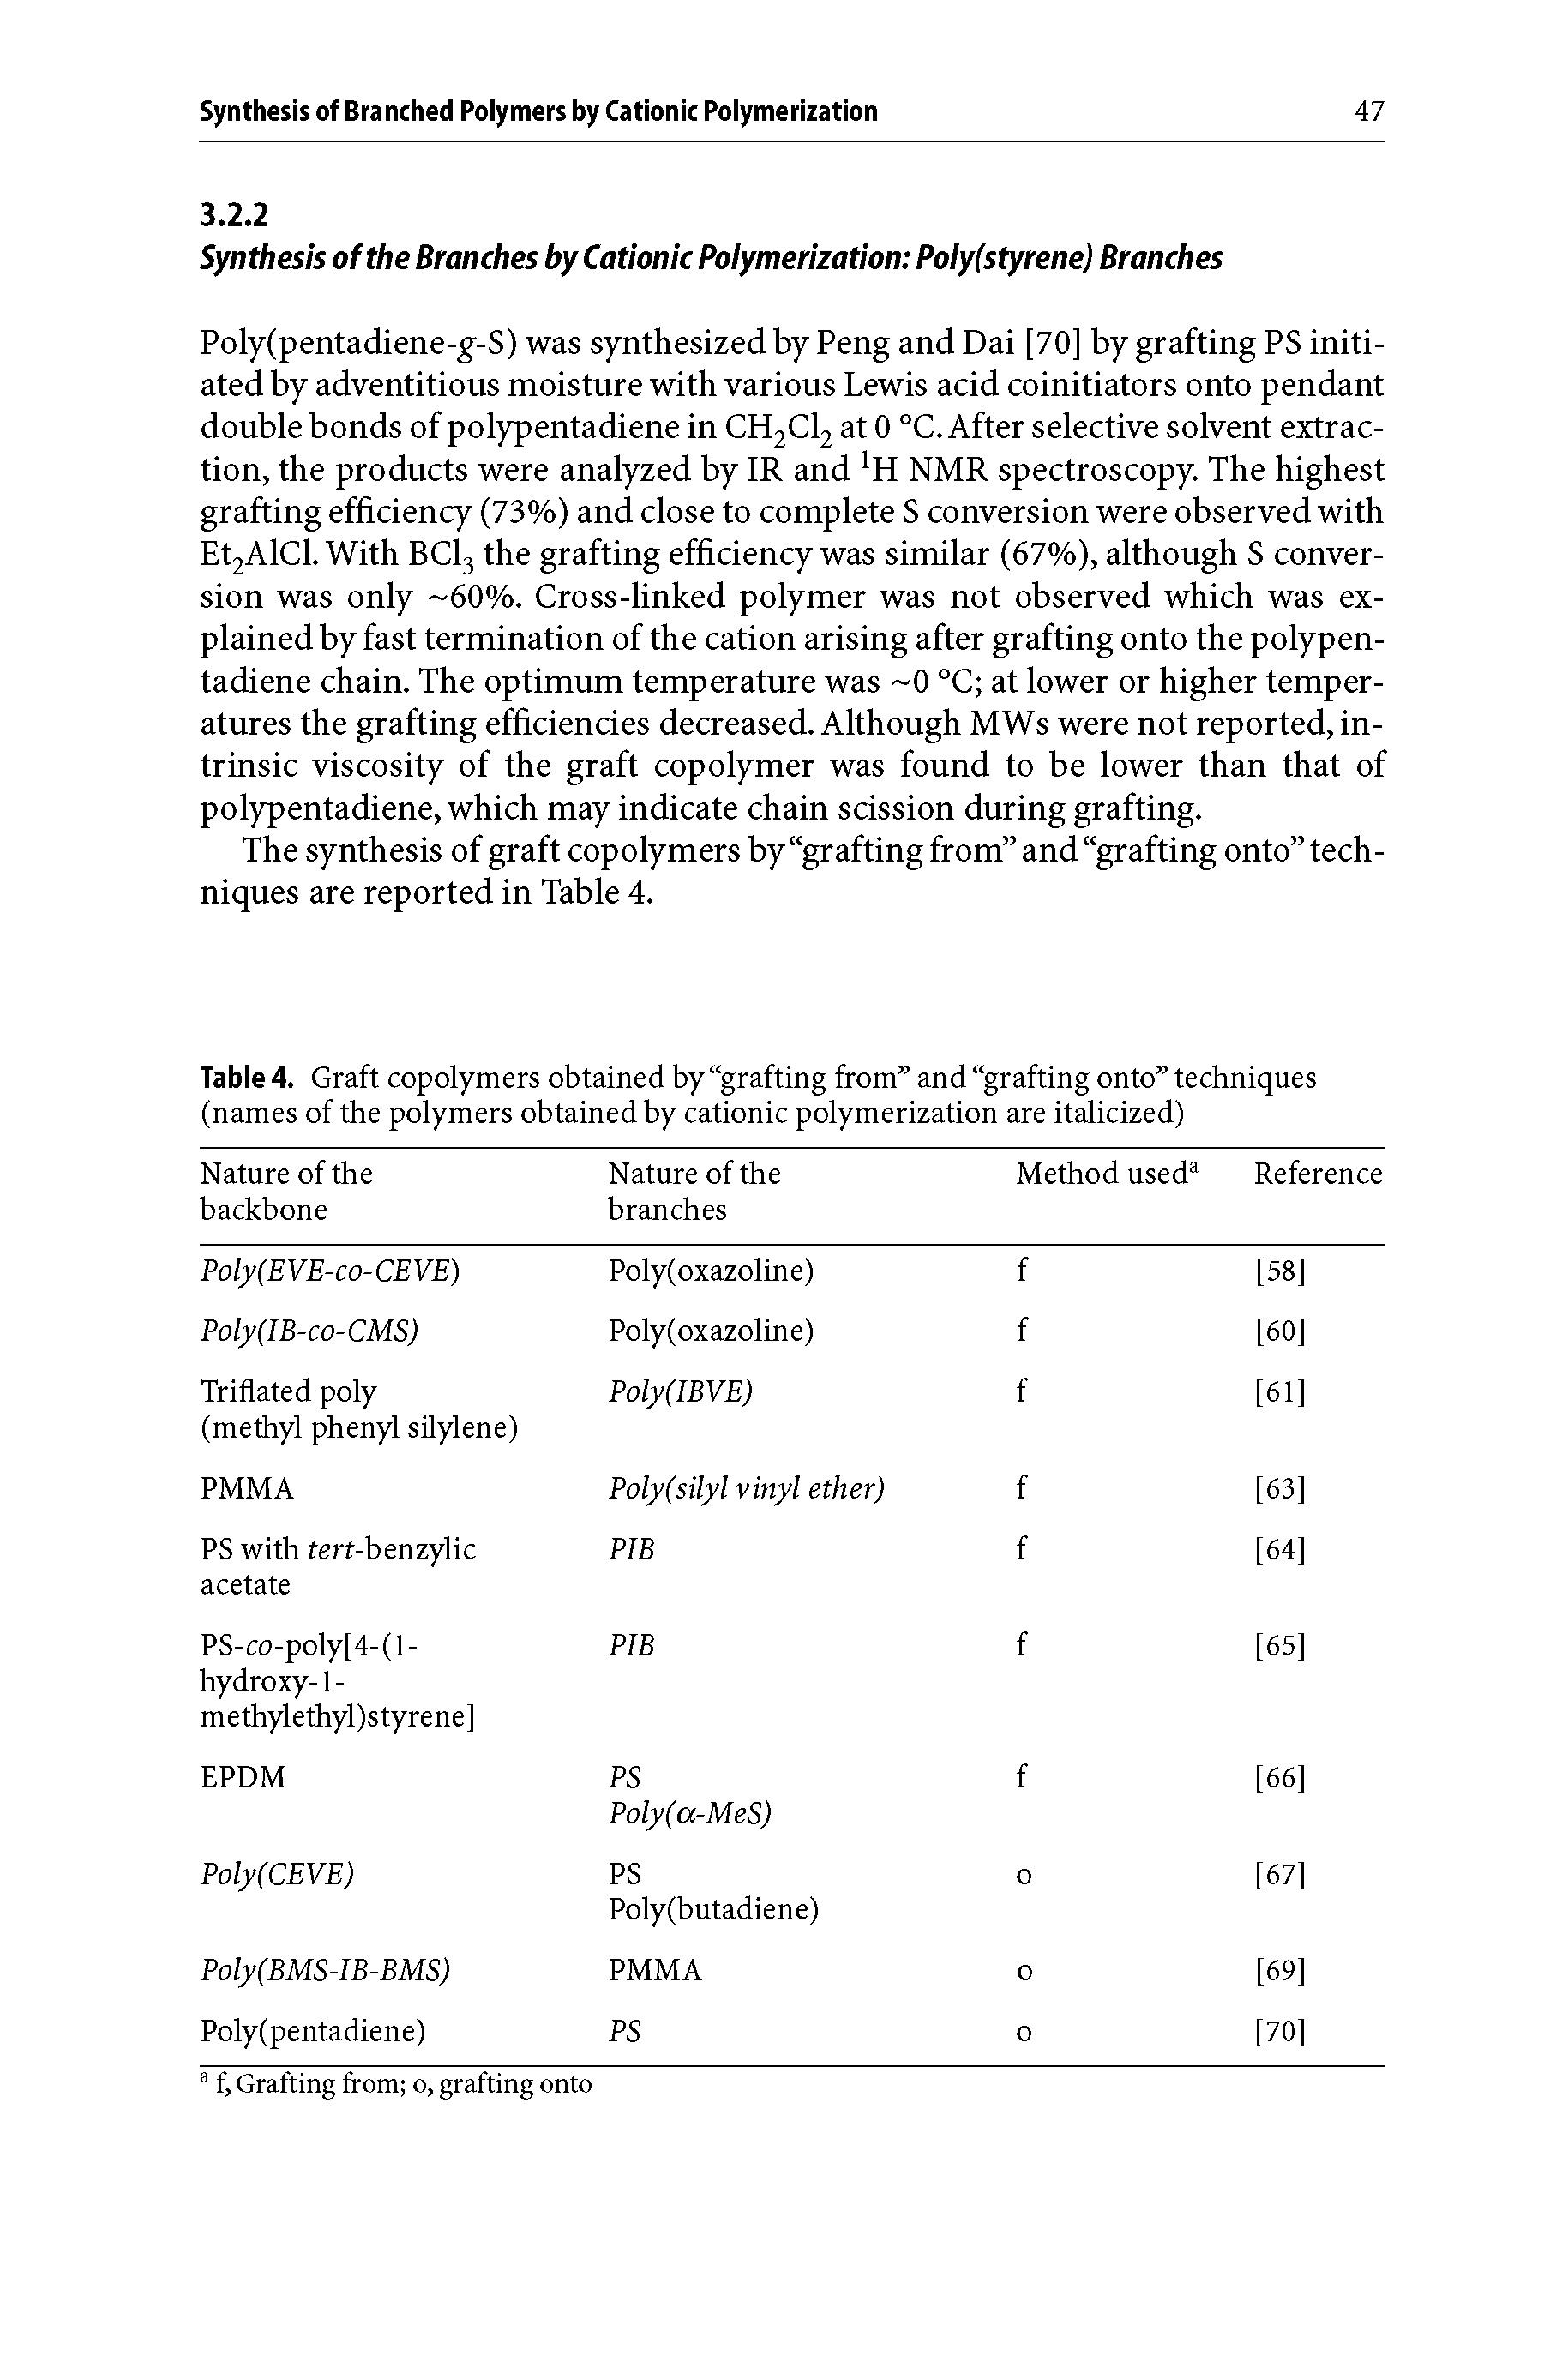 Table 4. Graft copolymers obtained by grafting from and grafting onto techniques (names of the polymers obtained by cationic polymerization are italicized)...